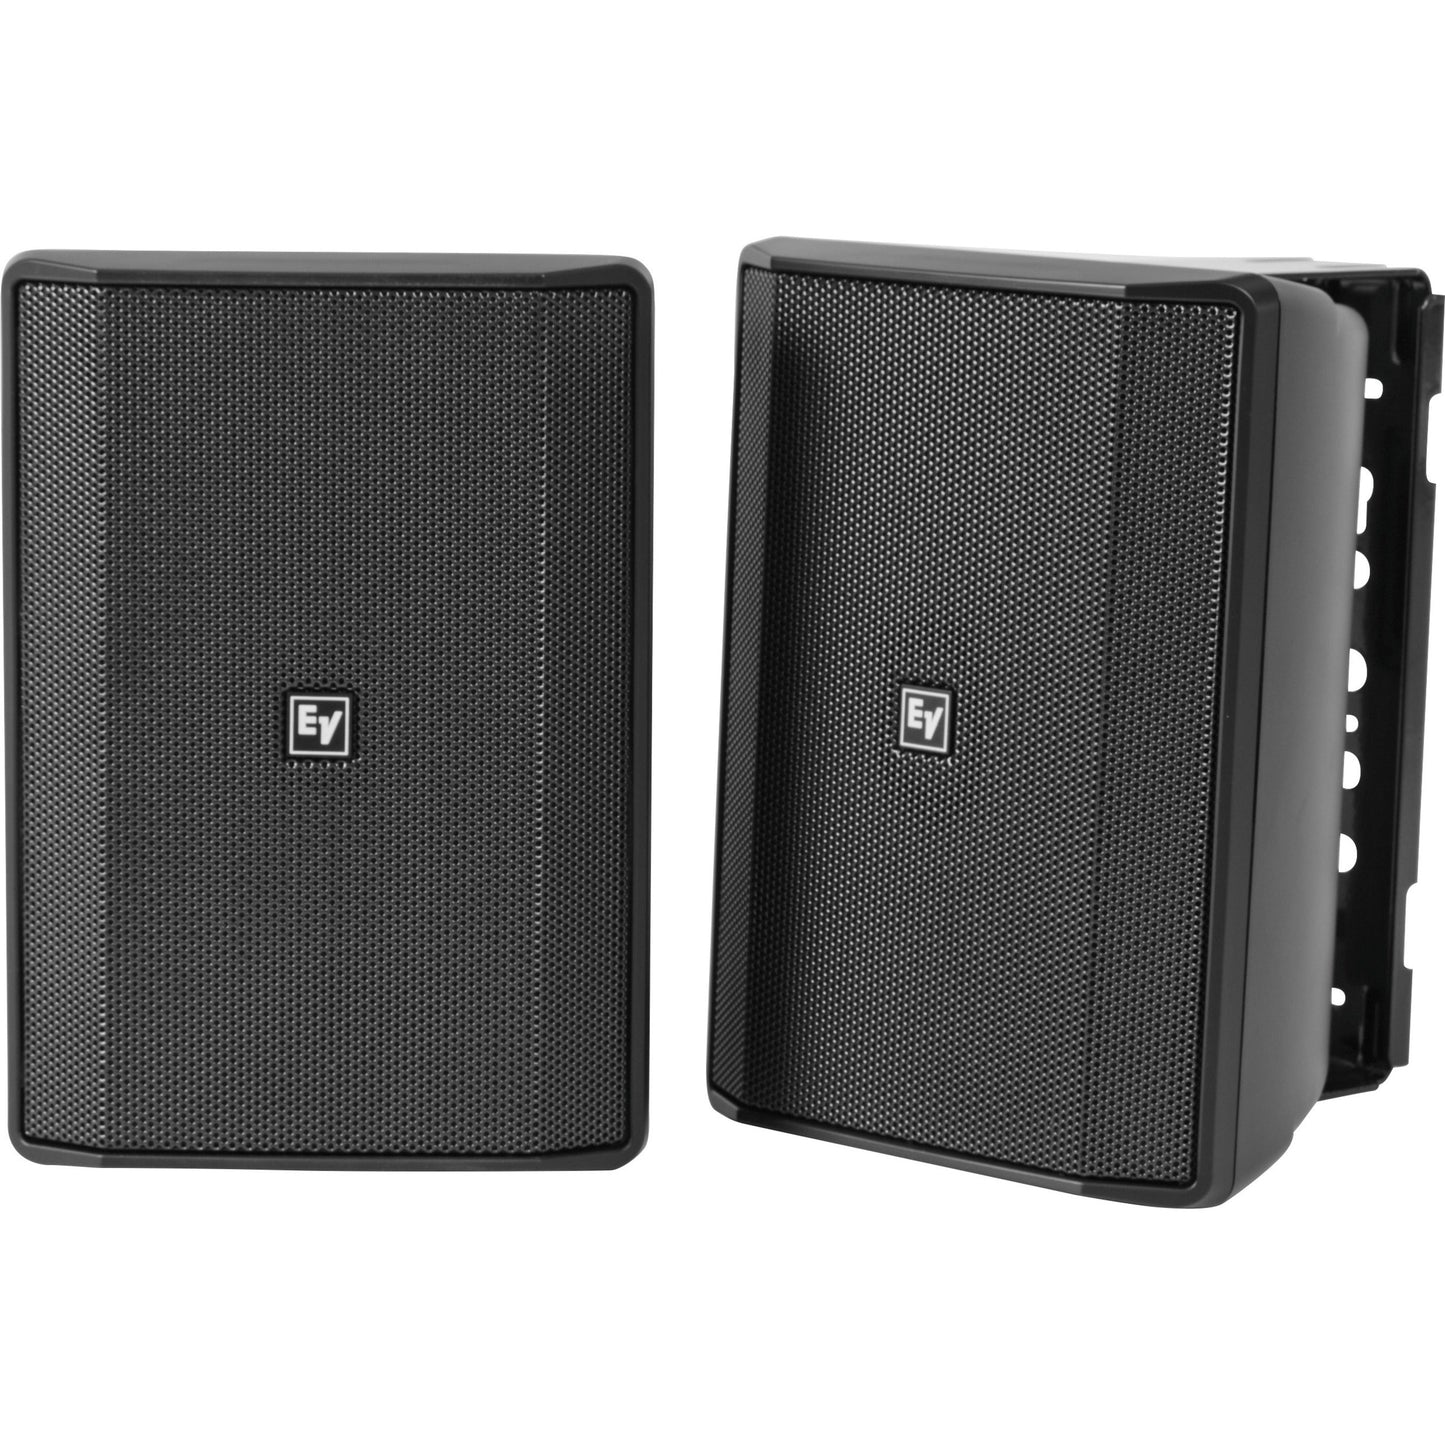 Electro-Voice EVID-S5.2X 2-way Indoor/Outdoor Surface Mount Wall Mountable Speaker - 75 W RMS - Black